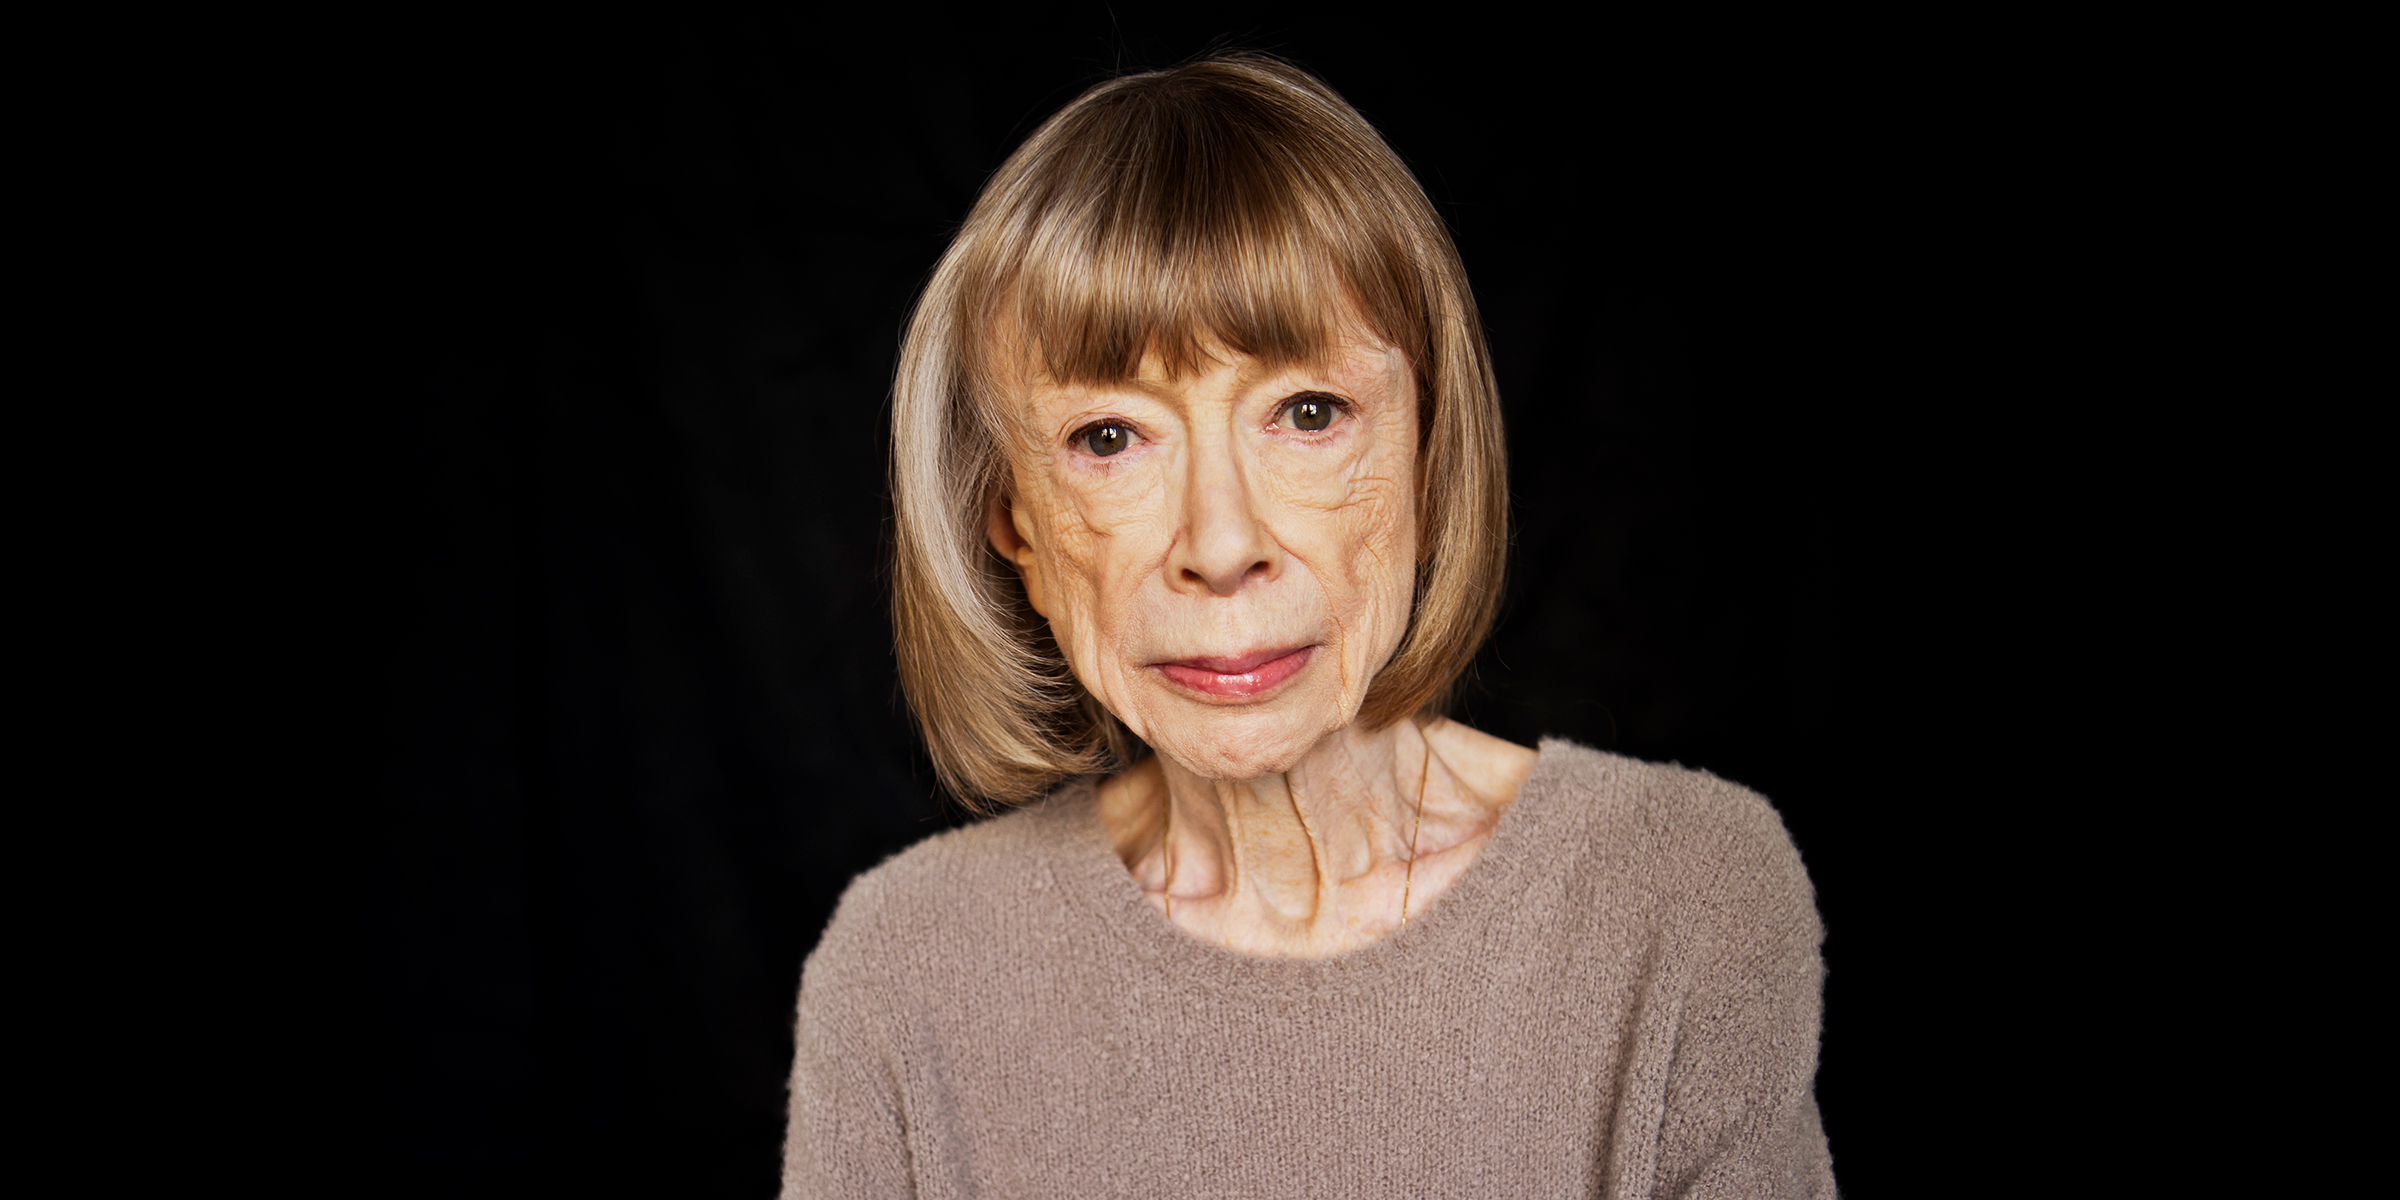 Joan Didion photographed in New York City, on Aug. 30, 2011. (Pieter M. van Hattem—Contour by Getty Images)